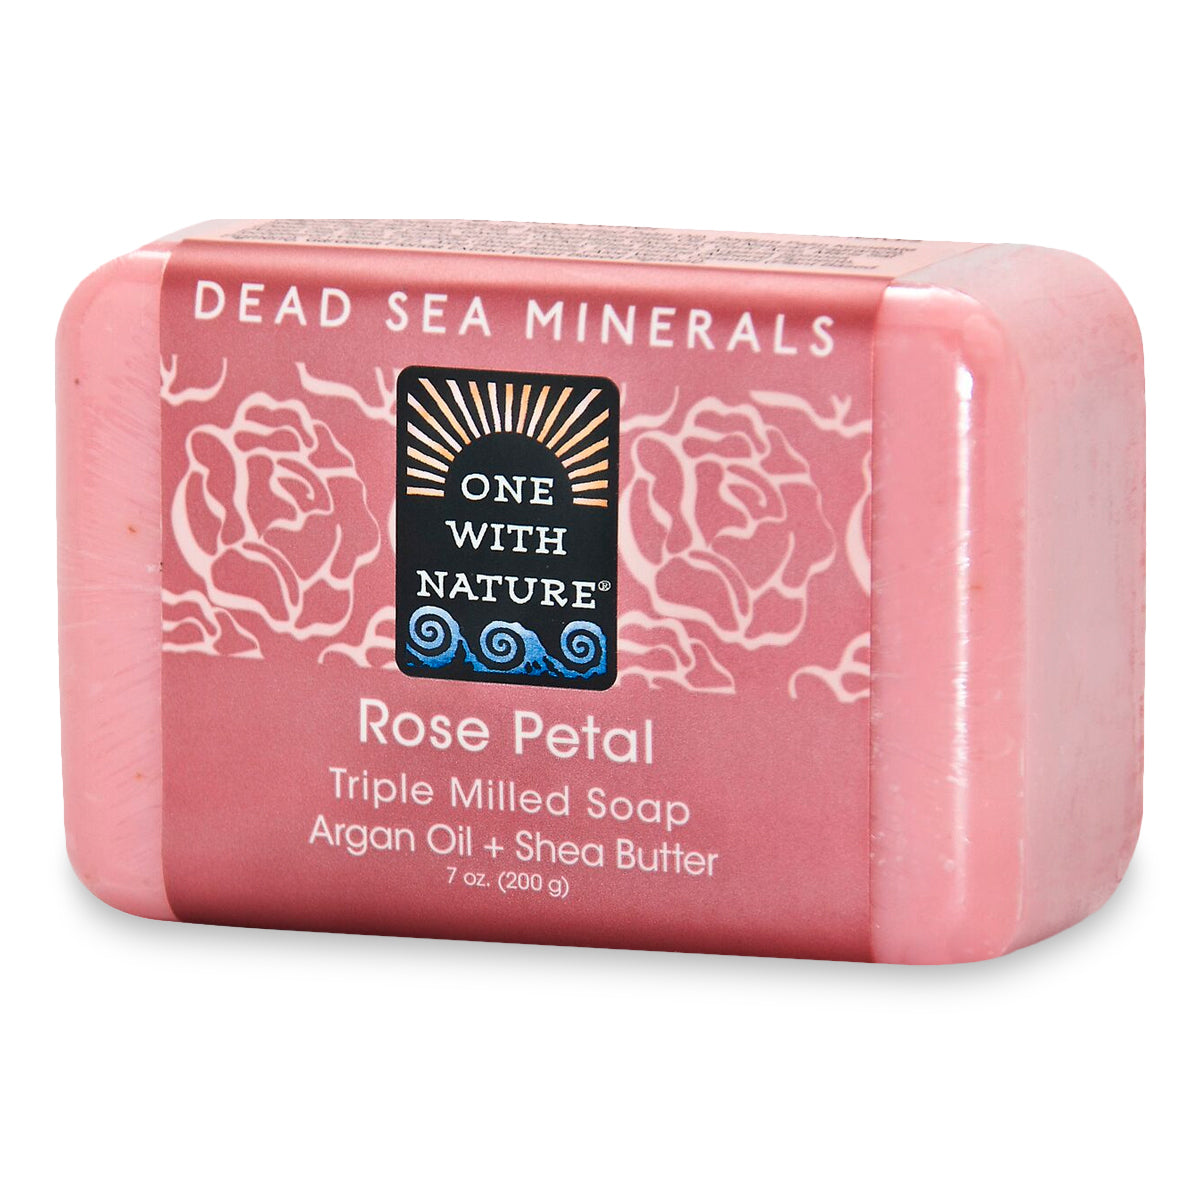 Primary image of Dead Sea Mineral Soap - Rose Petal